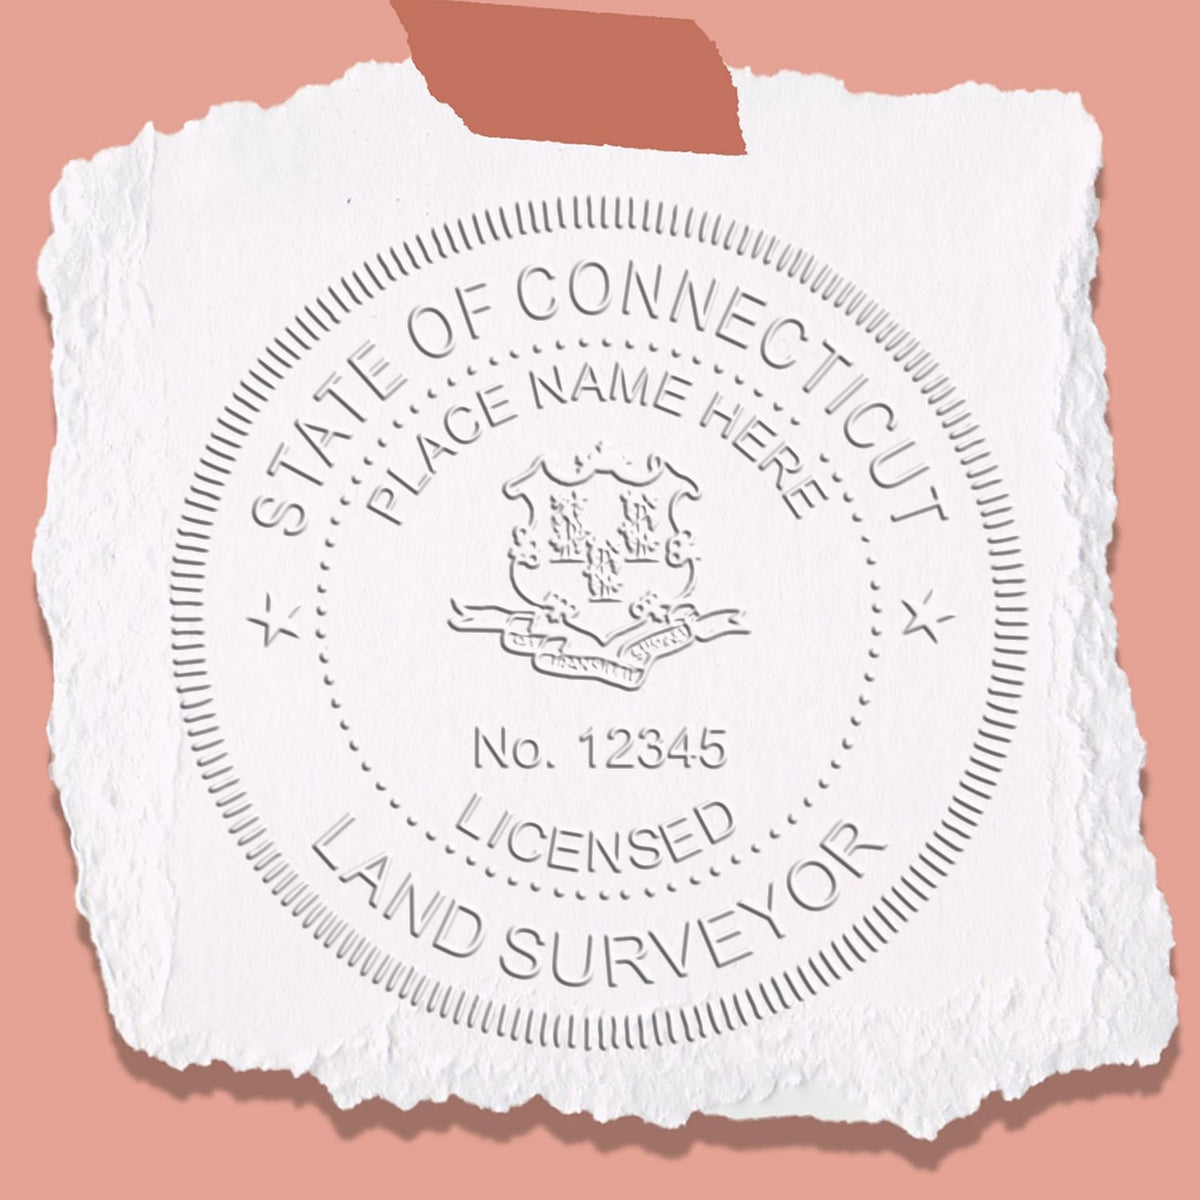 A stamped imprint of the Gift Connecticut Land Surveyor Seal in this stylish lifestyle photo, setting the tone for a unique and personalized product.